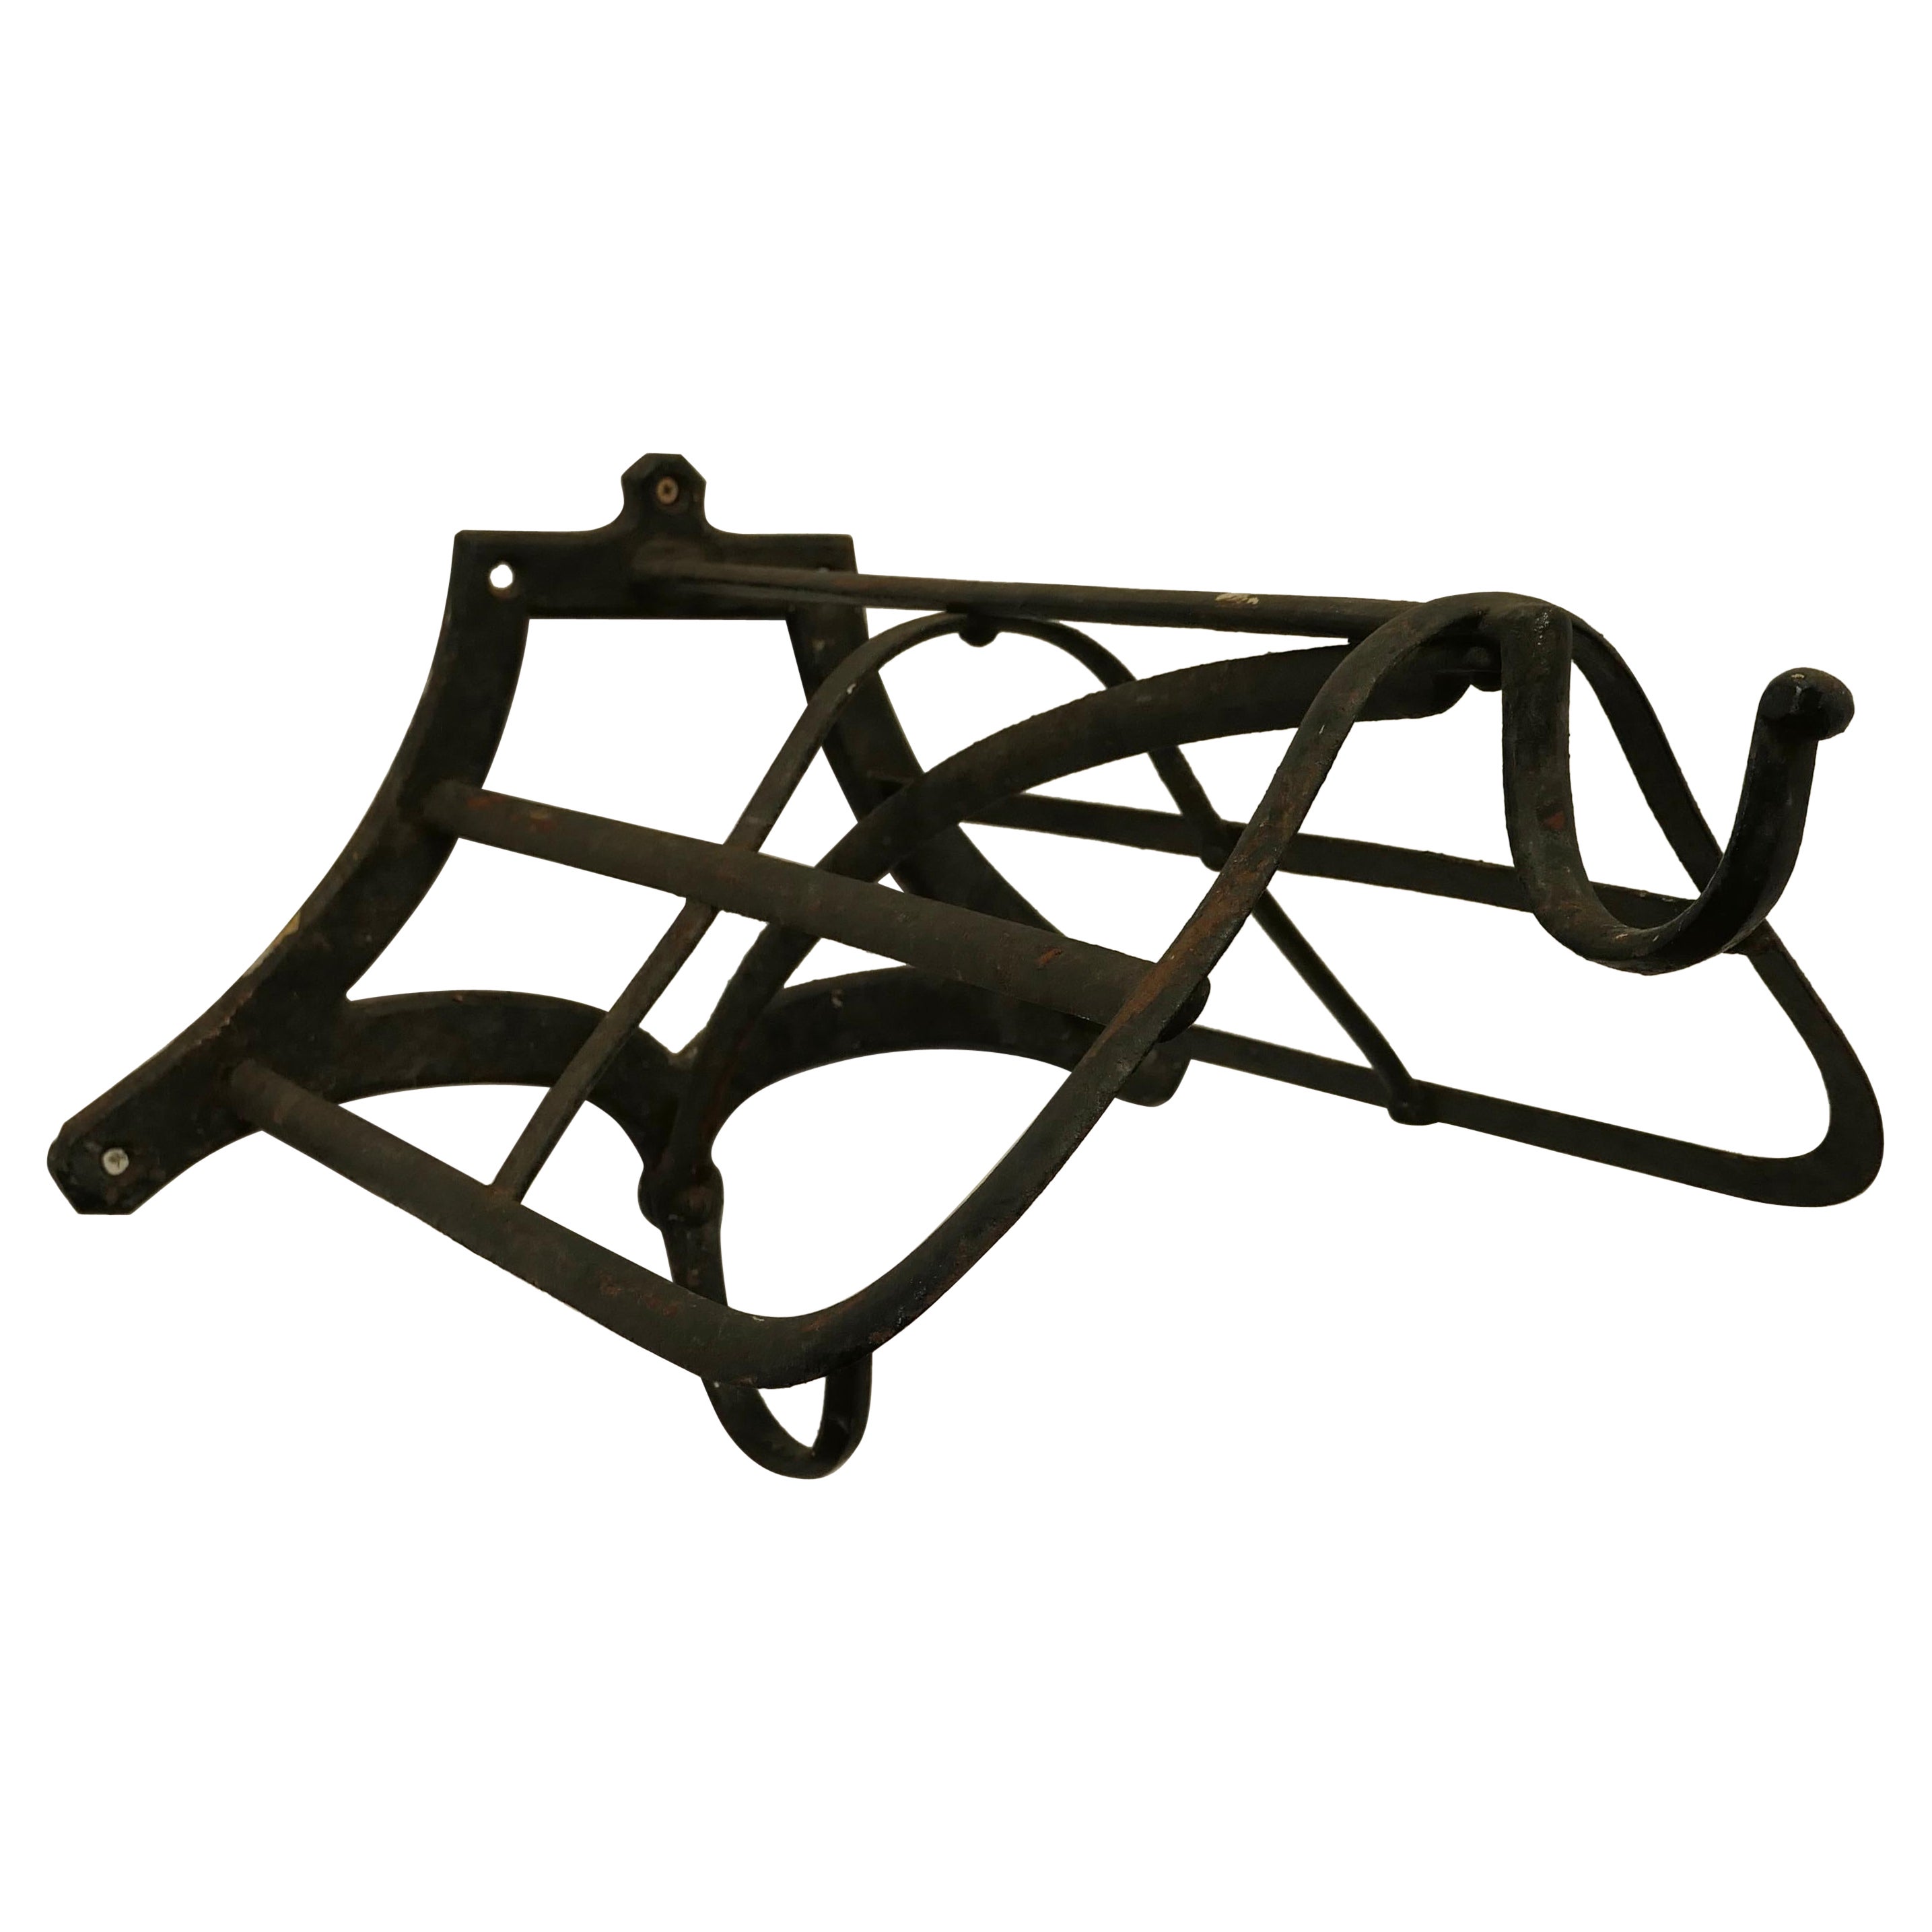 Antique Iron Wall Hanging Saddle Rack For Sale